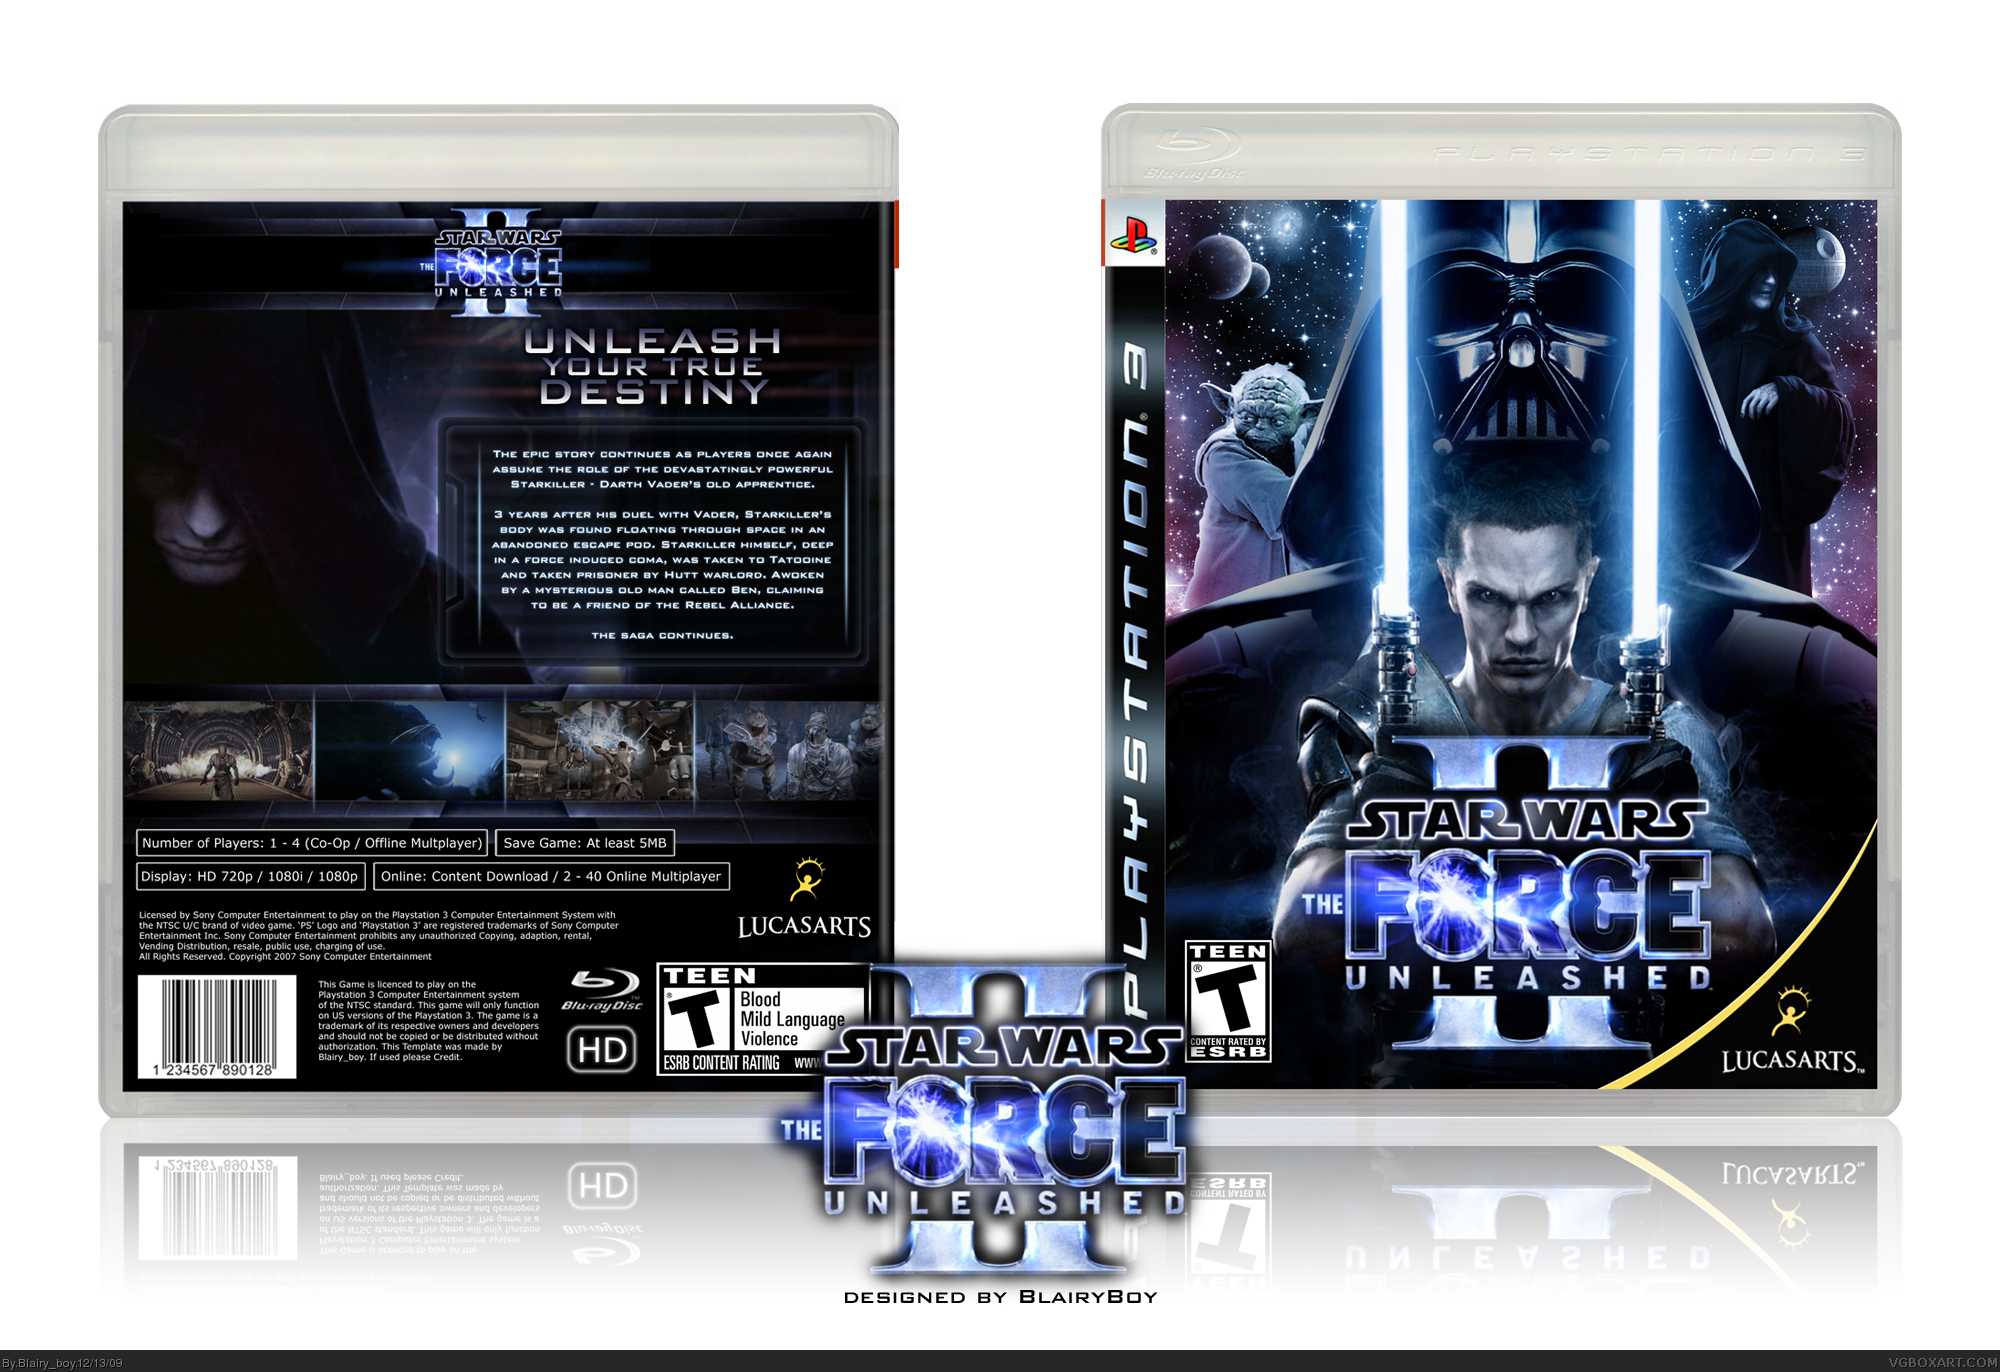 Star Wars Force ps2. Star Wars: the Force unleashed II (ps3). Force unleashed 2 ps3. PLAYSTATION 2 the Force unleashed. Коды star wars the force unleashed 2